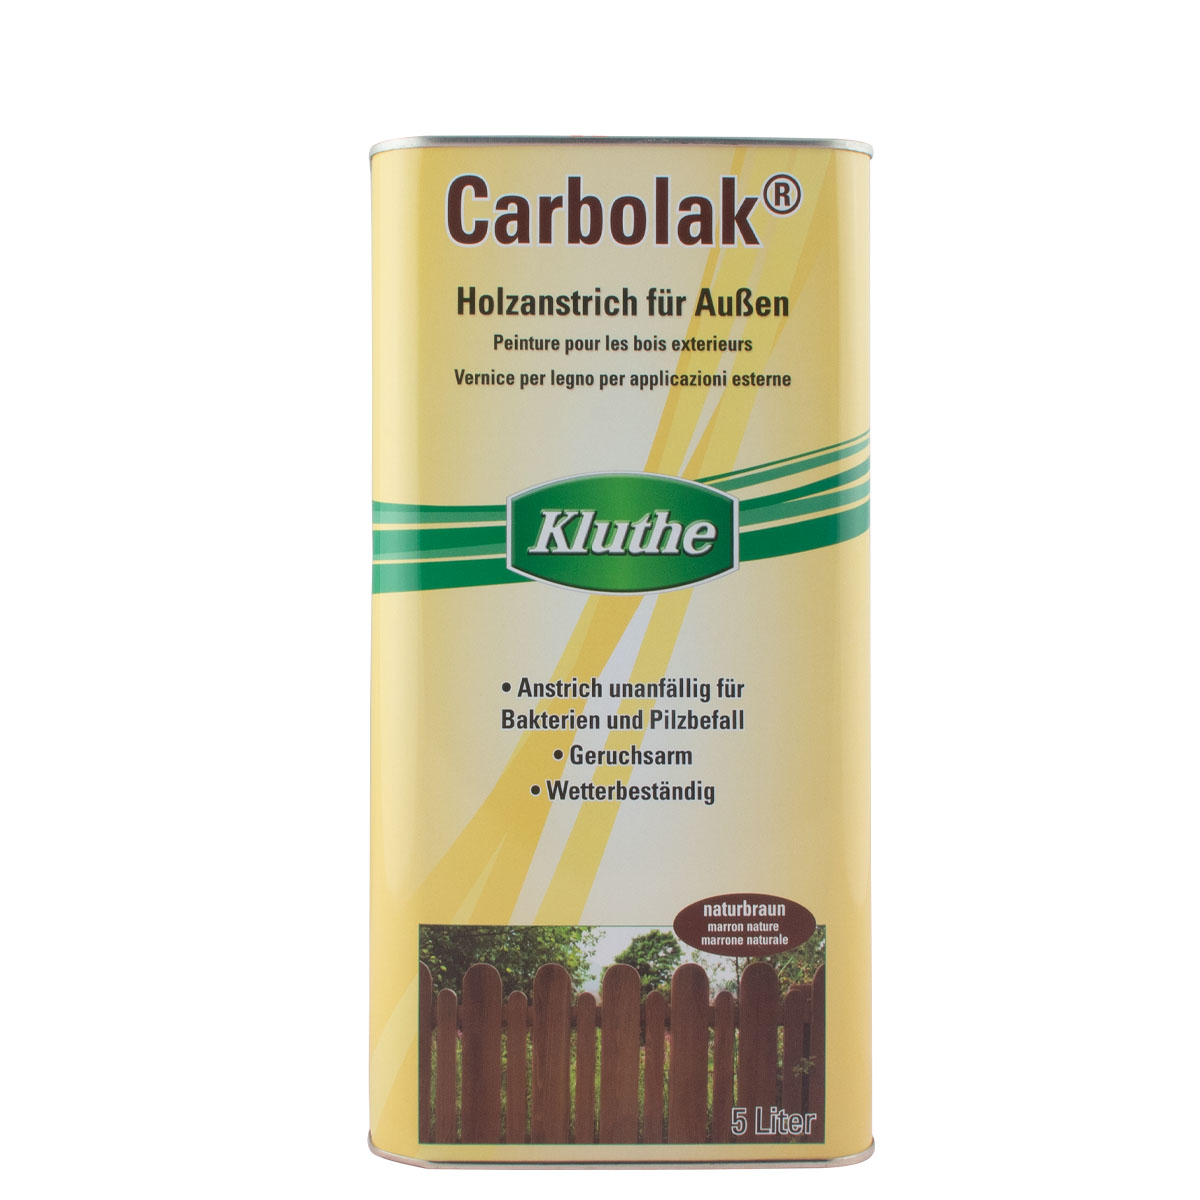 Kluthe_carbolak_holzanstrich_5l_gross